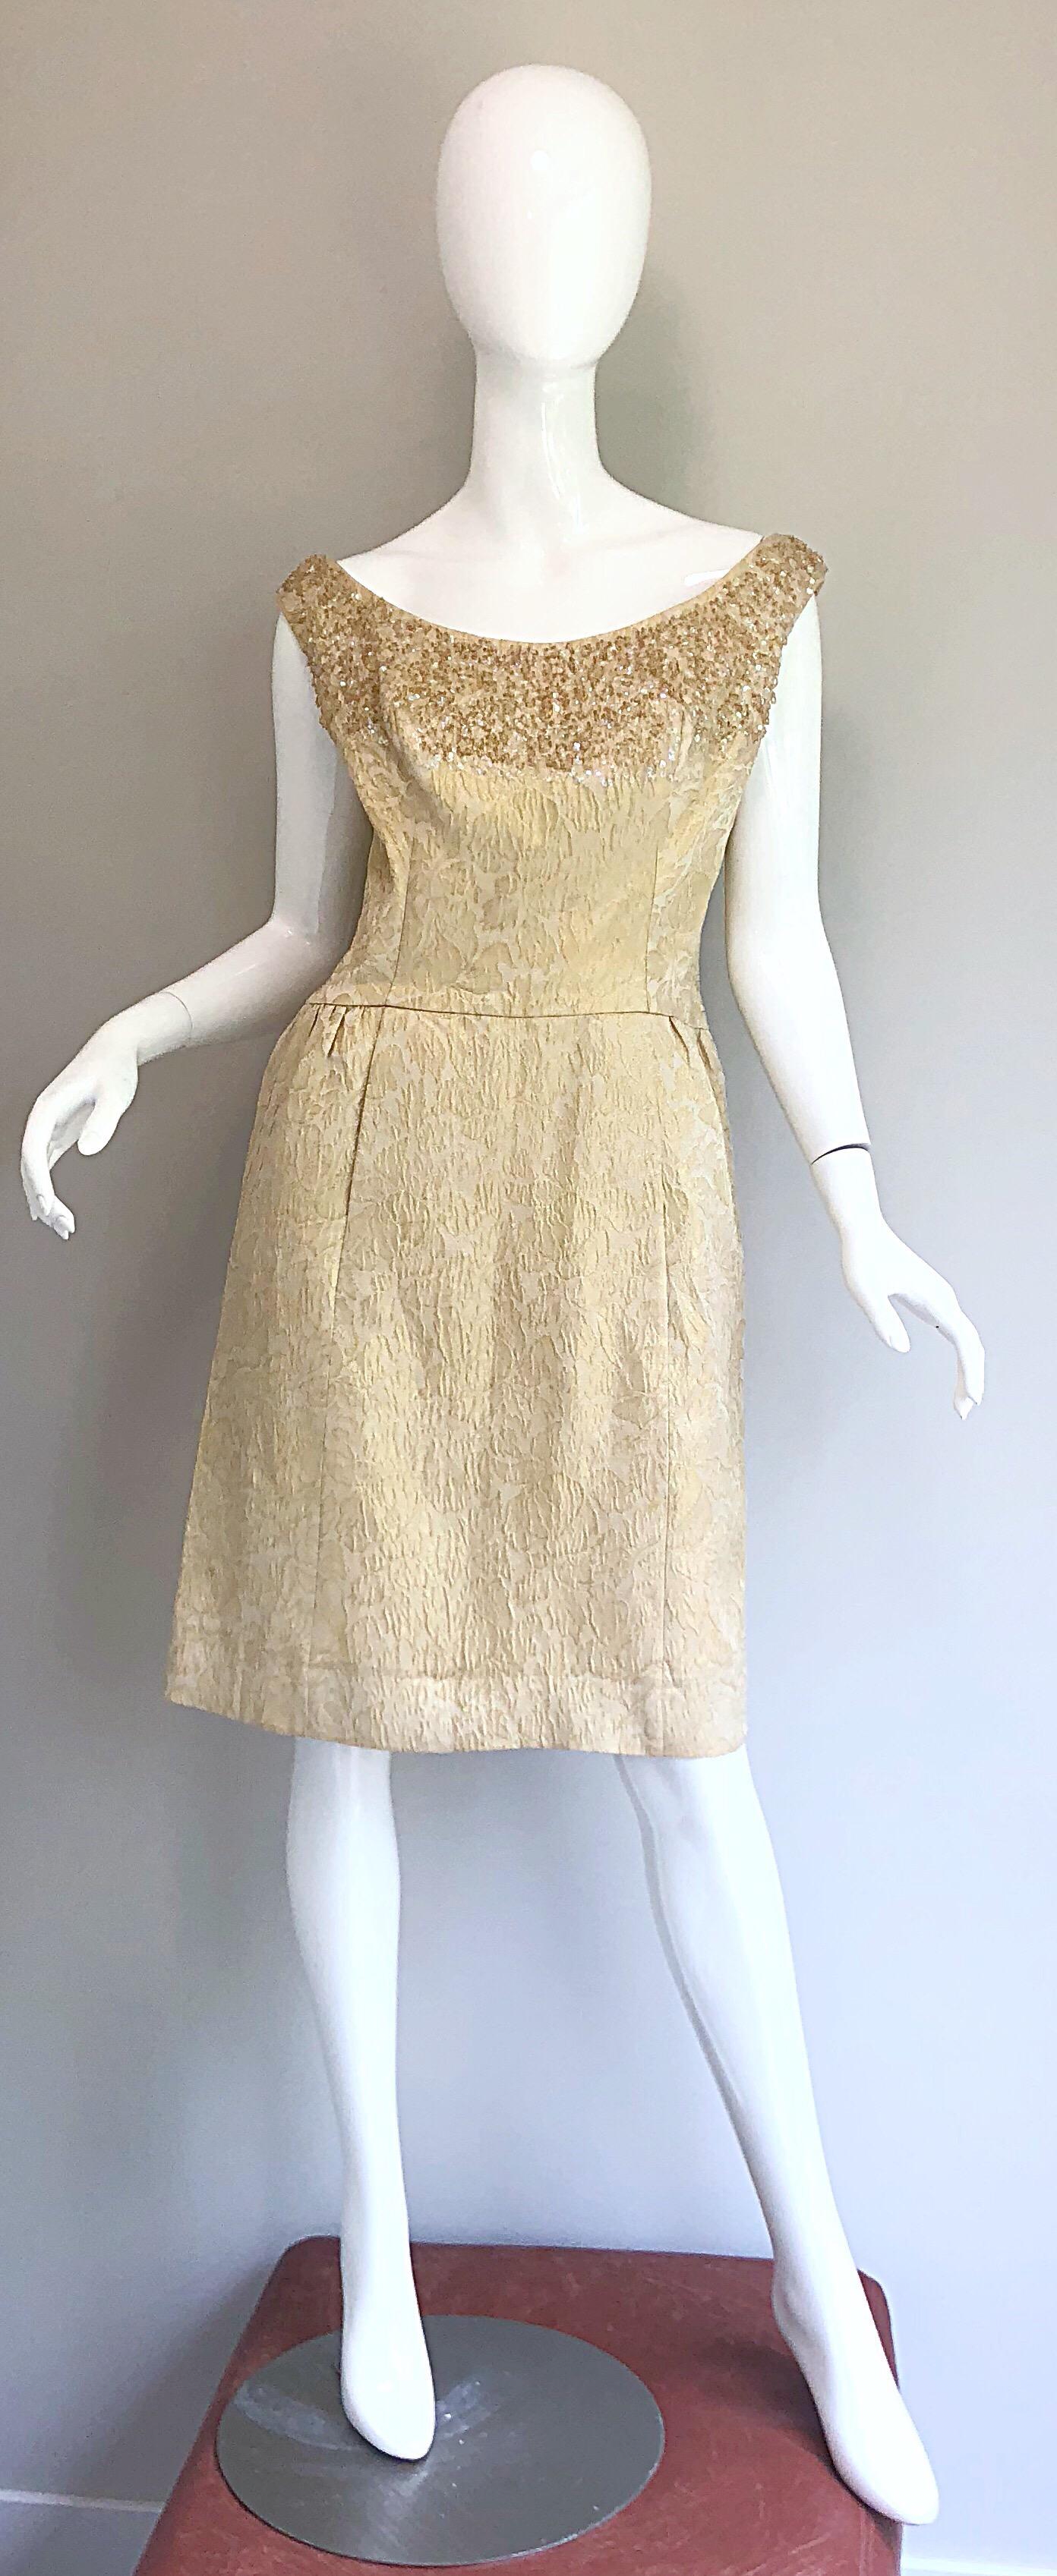 Pretty 1950s larger size couture quality gold metallic silk brocade sequined and beaded cocktail dress! Features a luxurious gold silk brocade fabric. Hundreds of hand-sewn iridescent sequins and beads throughout the top front and back bodice.